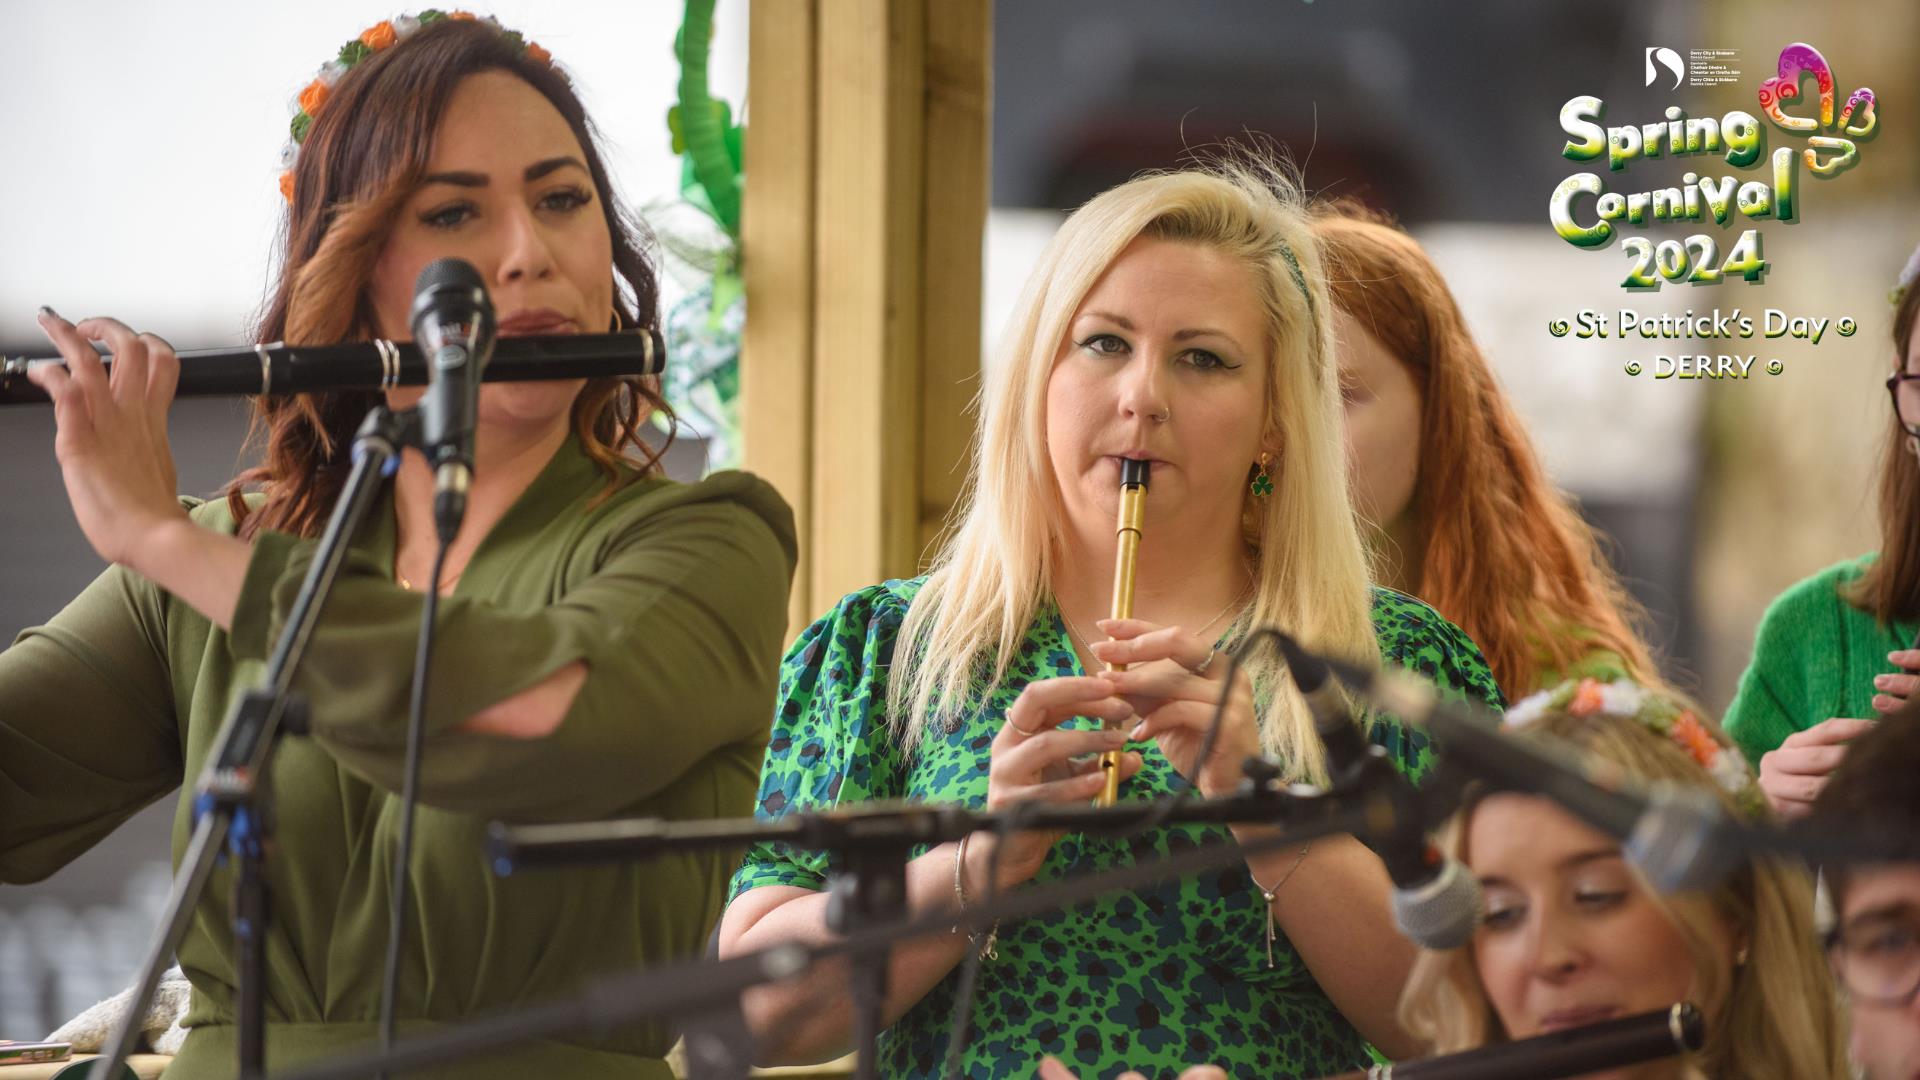 Promotional image for the 'Live Music at the Guildhall Square' Spring Carnival event, showing several people playing instruments.